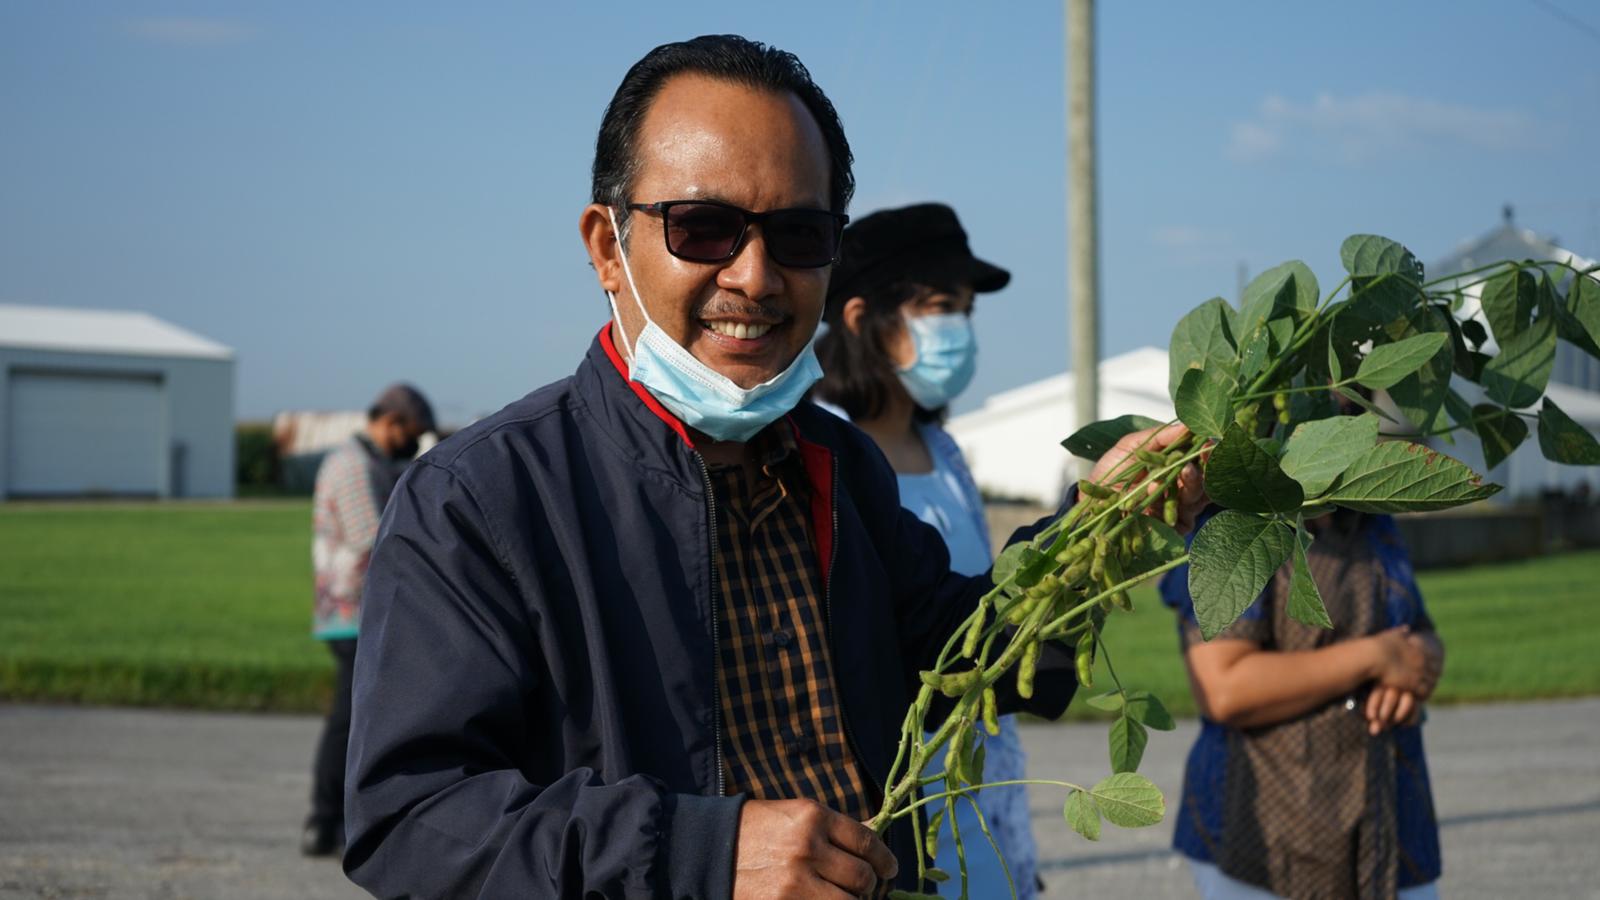 Indonesia wants to enhance agricultural cooperation with U.S’ Indiana